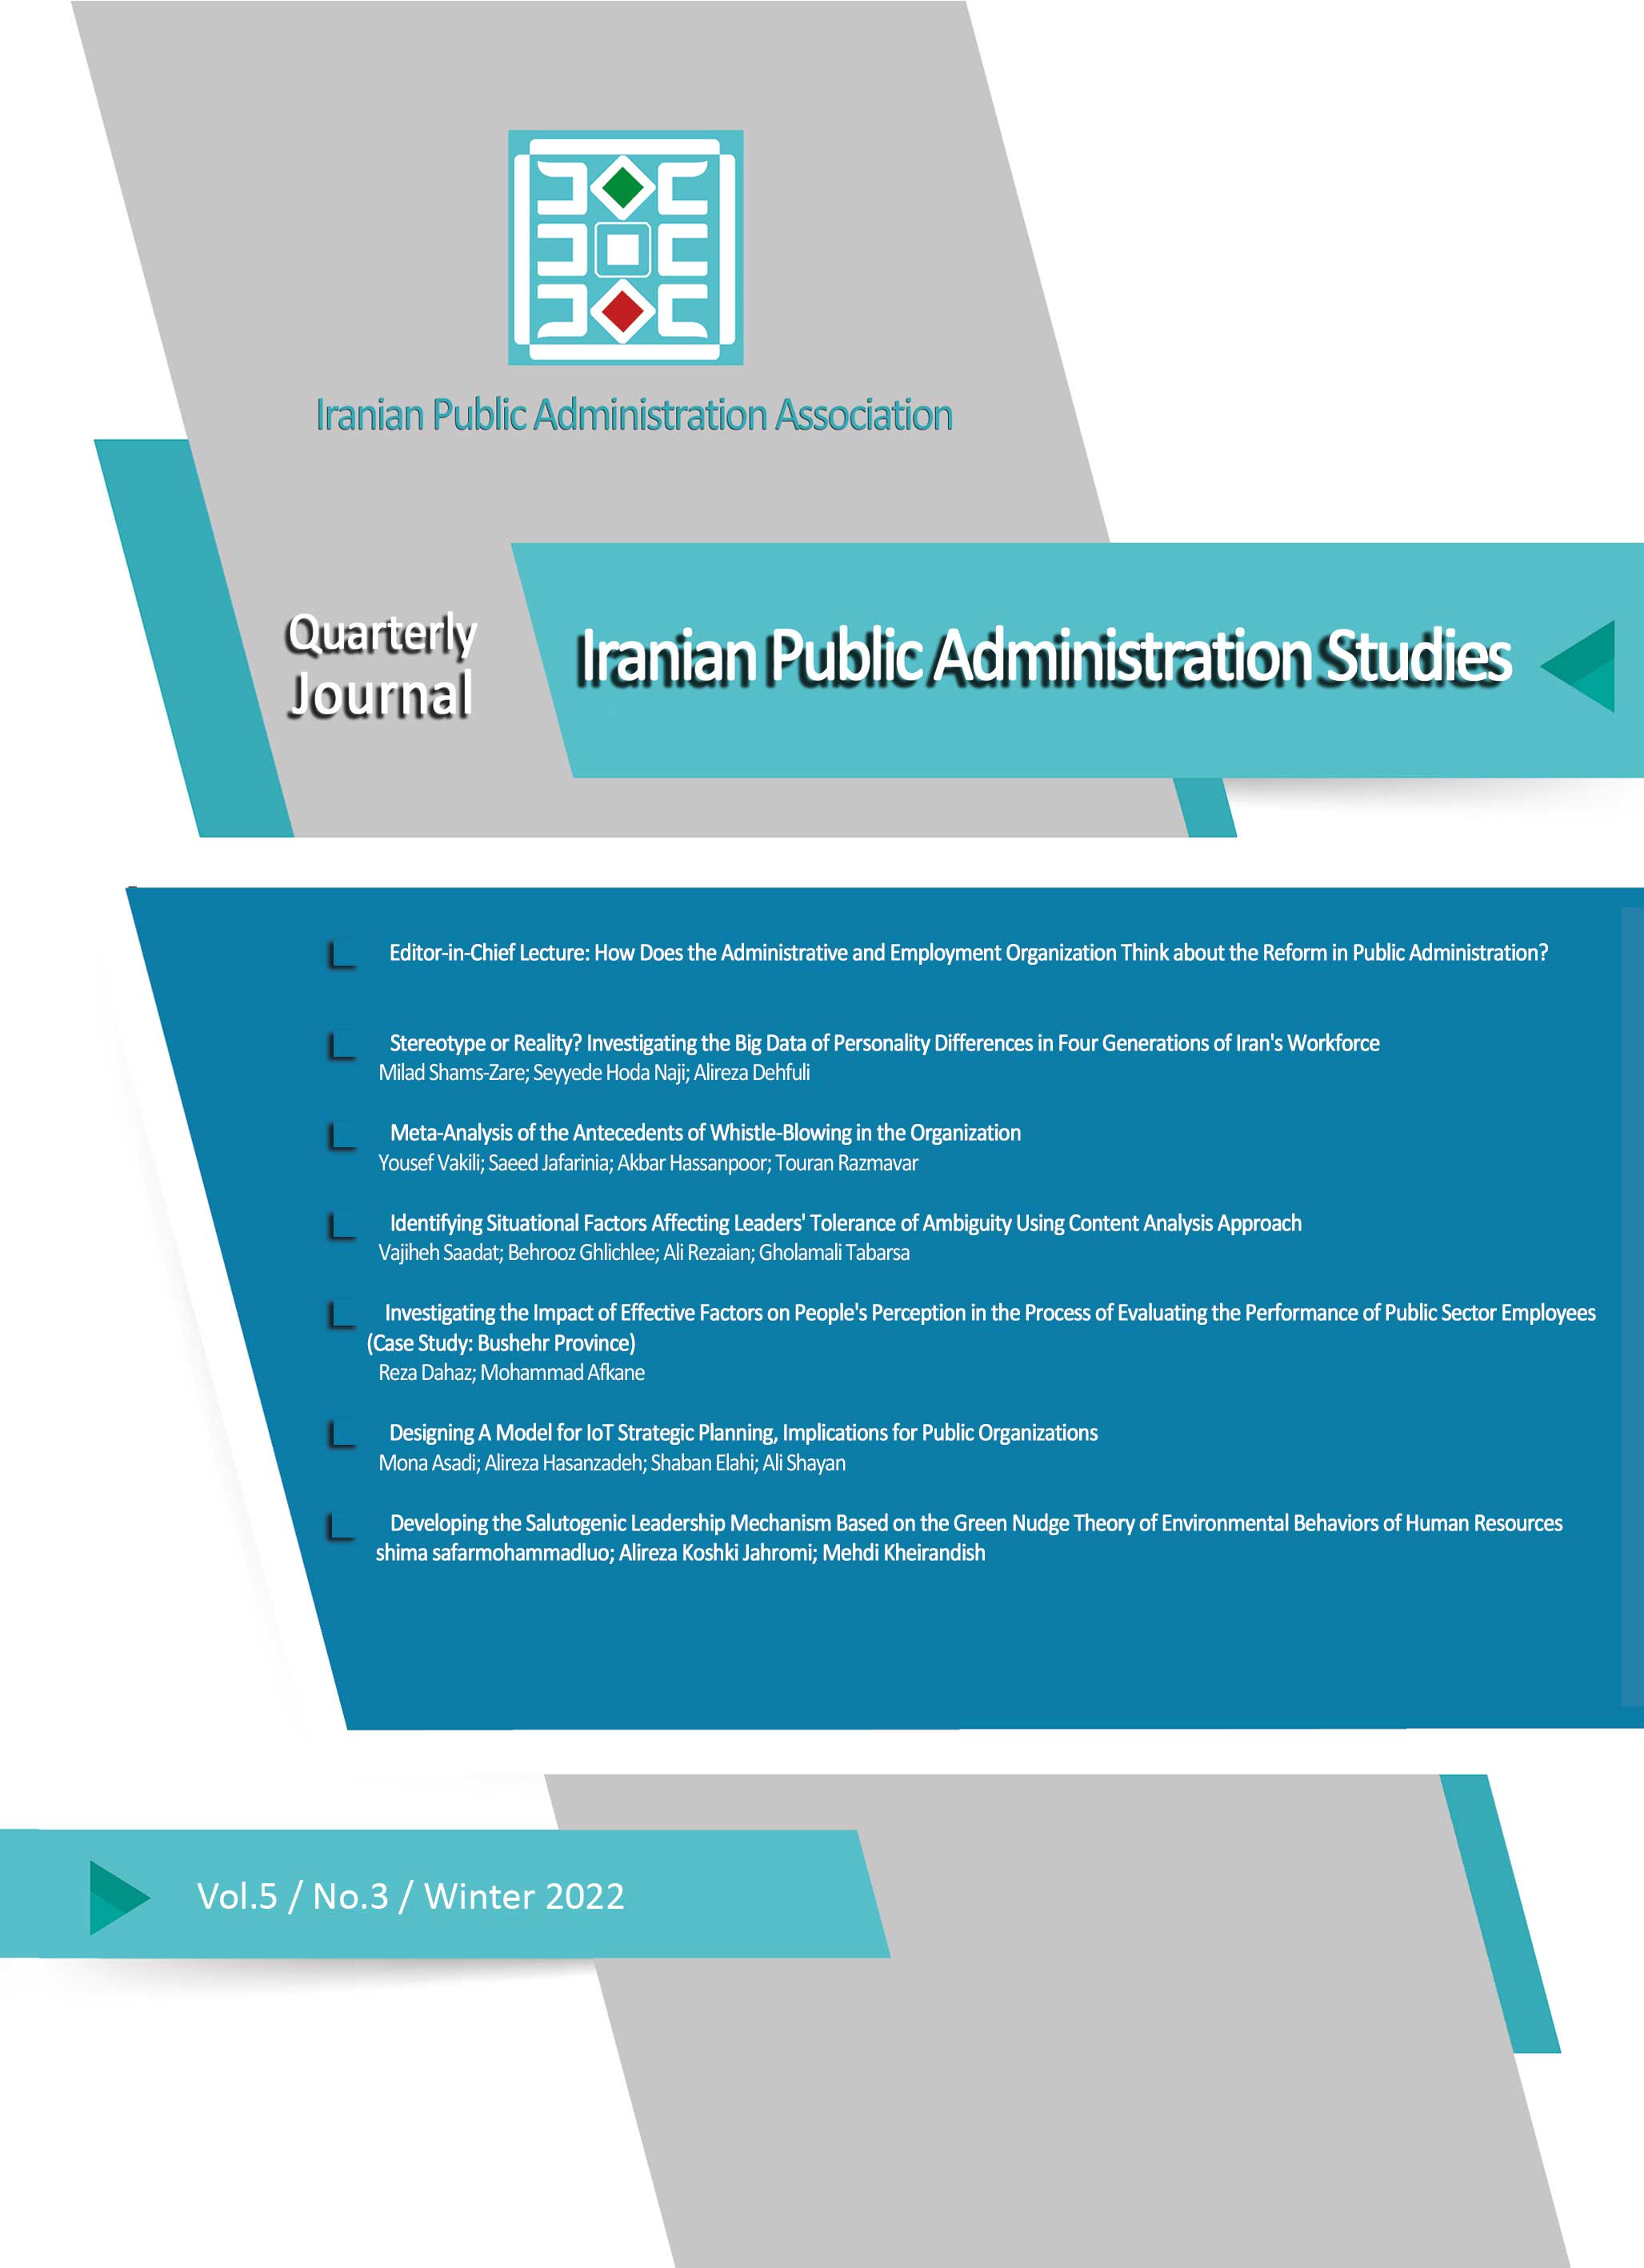 Journal of Iranian Public Administration Studies